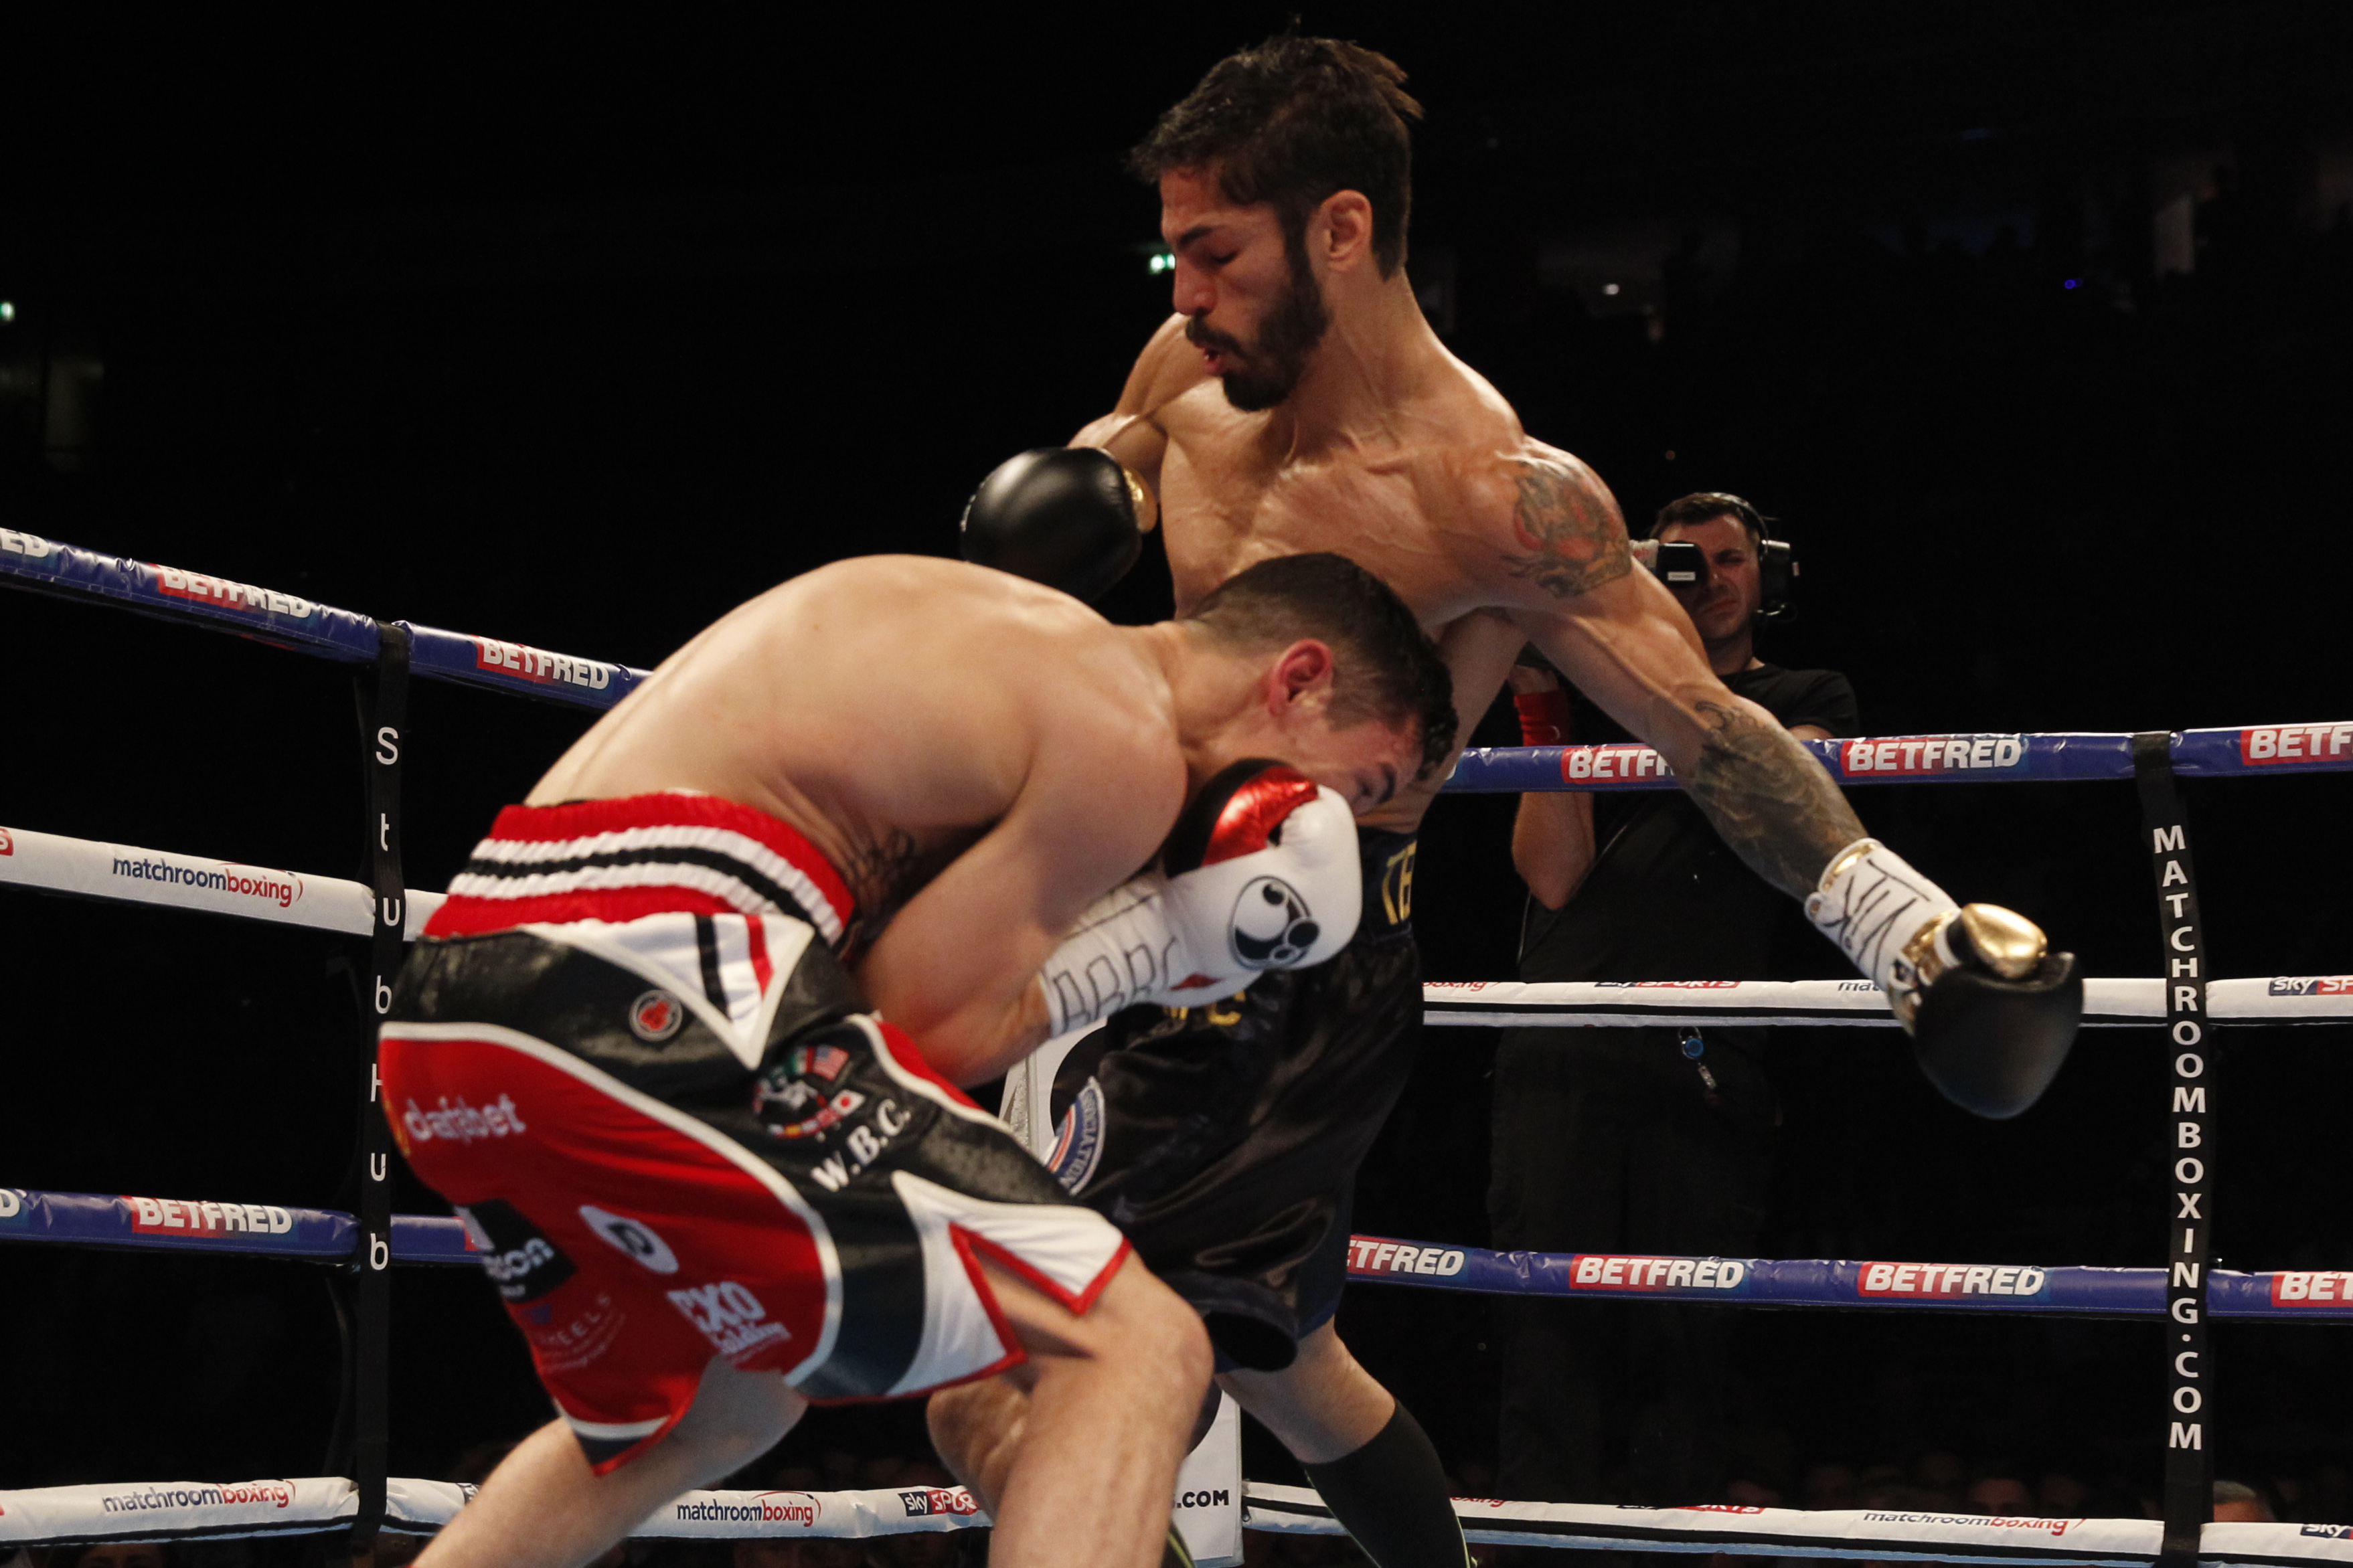 Showtime World Championship Boxing Preview: Anthony Crolla vs. Jorge Linares